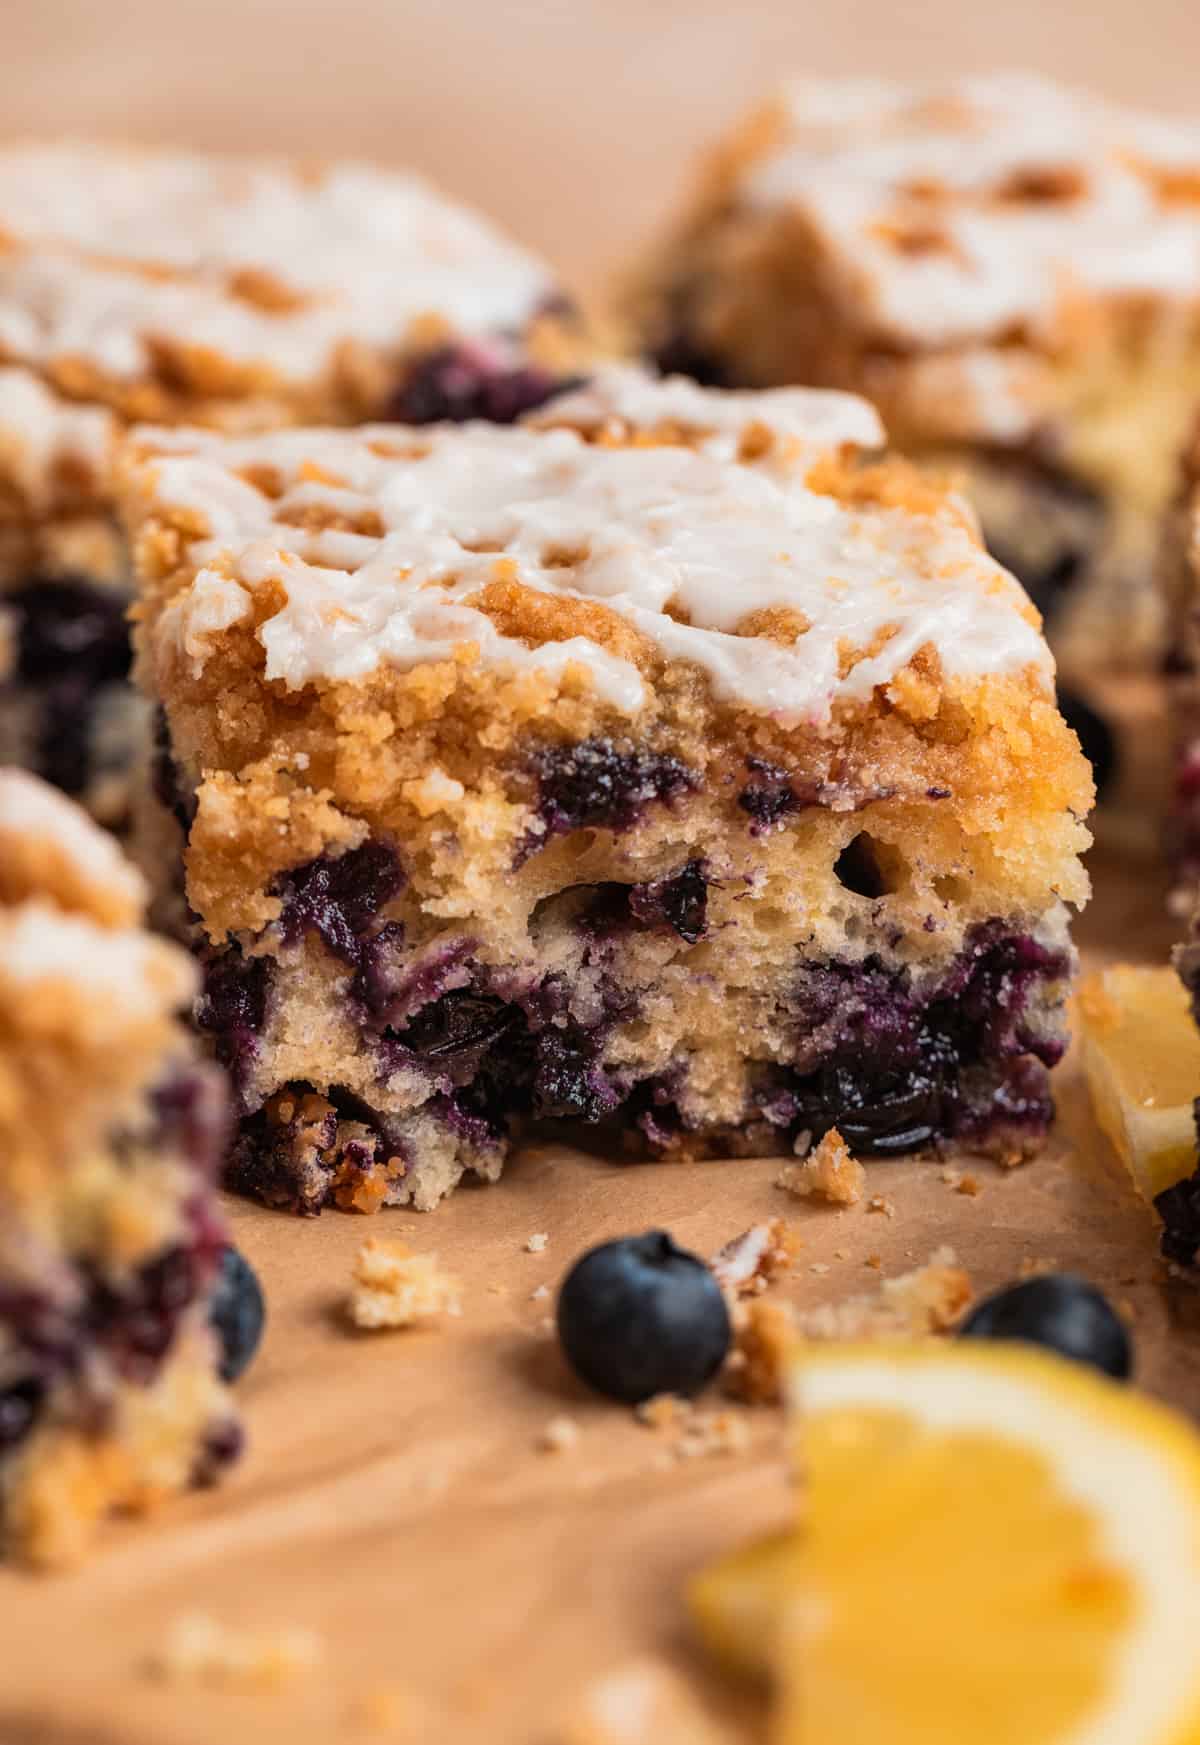 Slice of blueberry coffee cake with icing over top and lemons and fresh blueberries beside it.